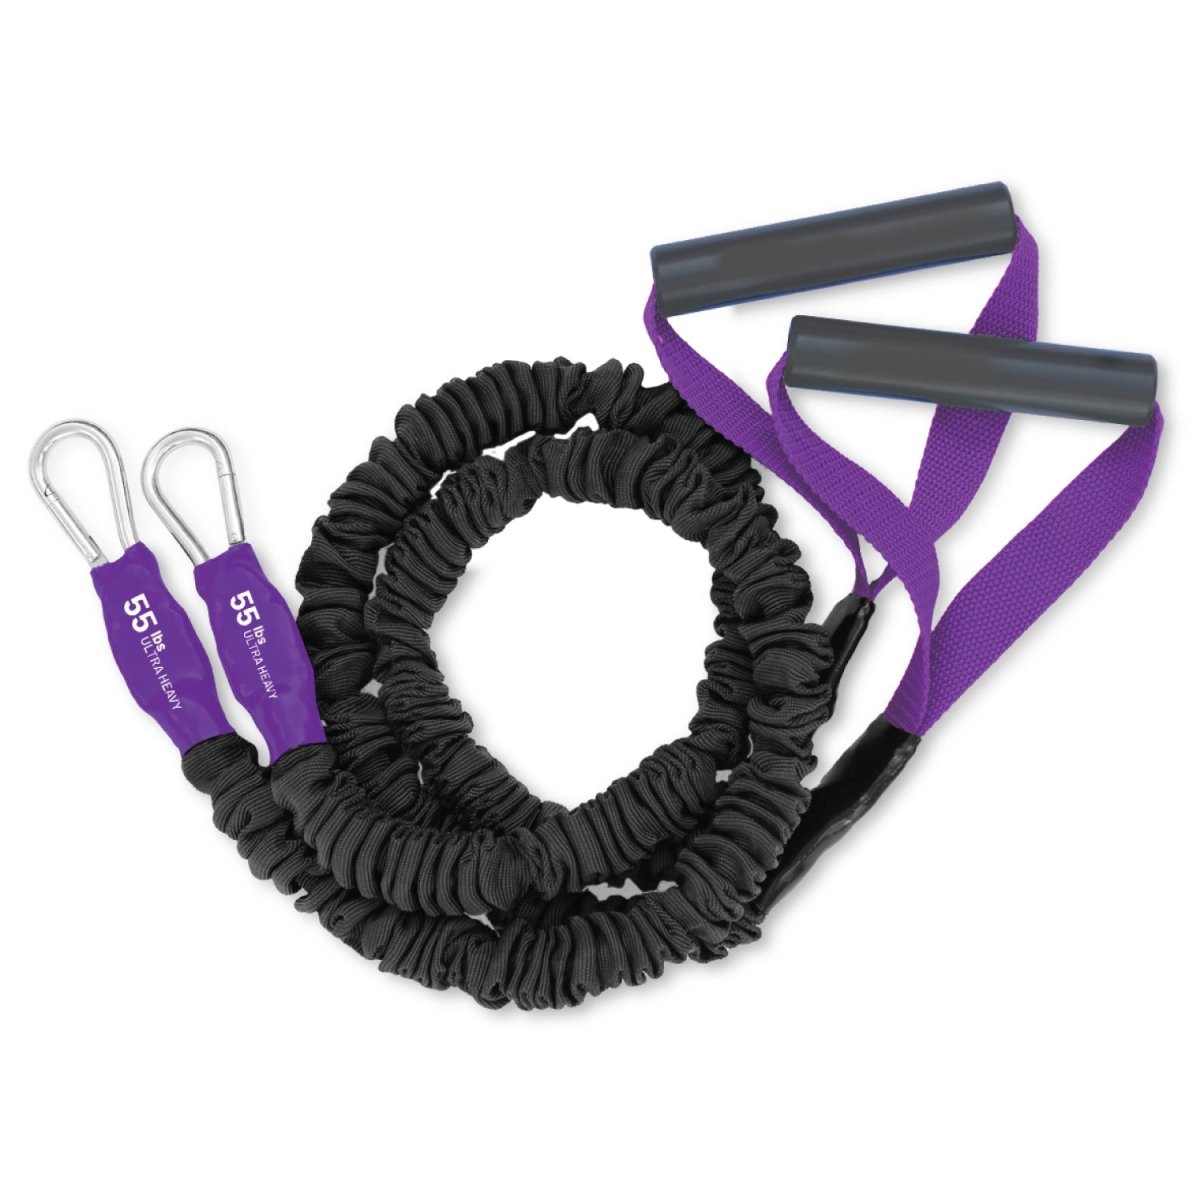 Lift more free weights by strengthening the smaller muscles that weights do not reach. This set of bands are designed to take your upper body workout to the next level by building stronger supporting muscles that  support the larger muscles you use during dead left. Protect yourself from injury while building strength and definition. 